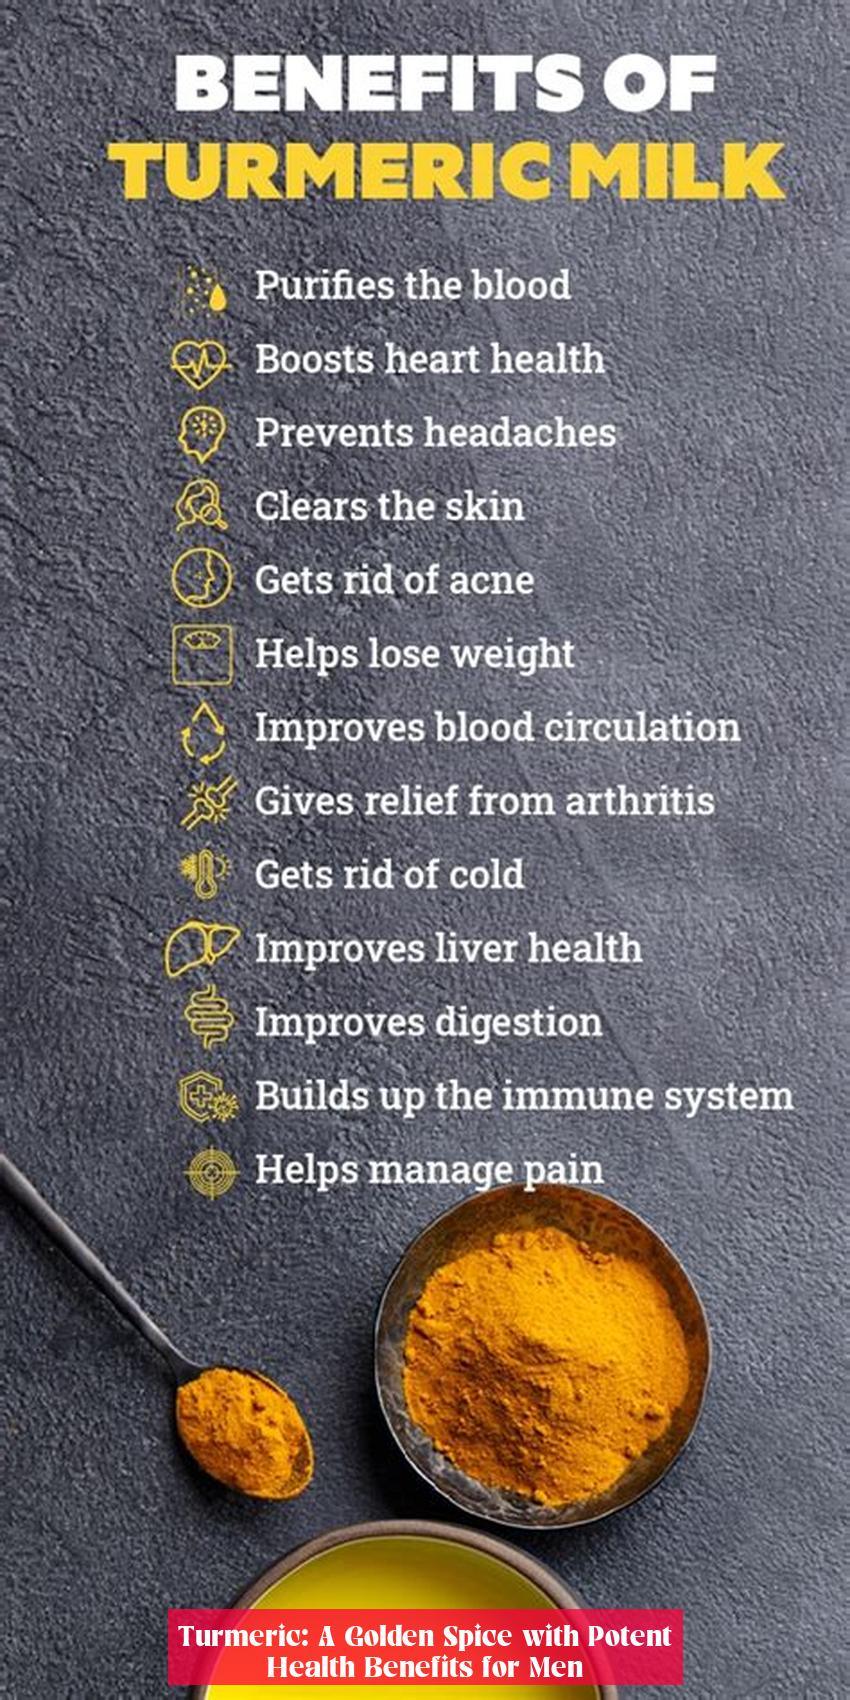 Turmeric: A Golden Spice with Potent Health Benefits for Men